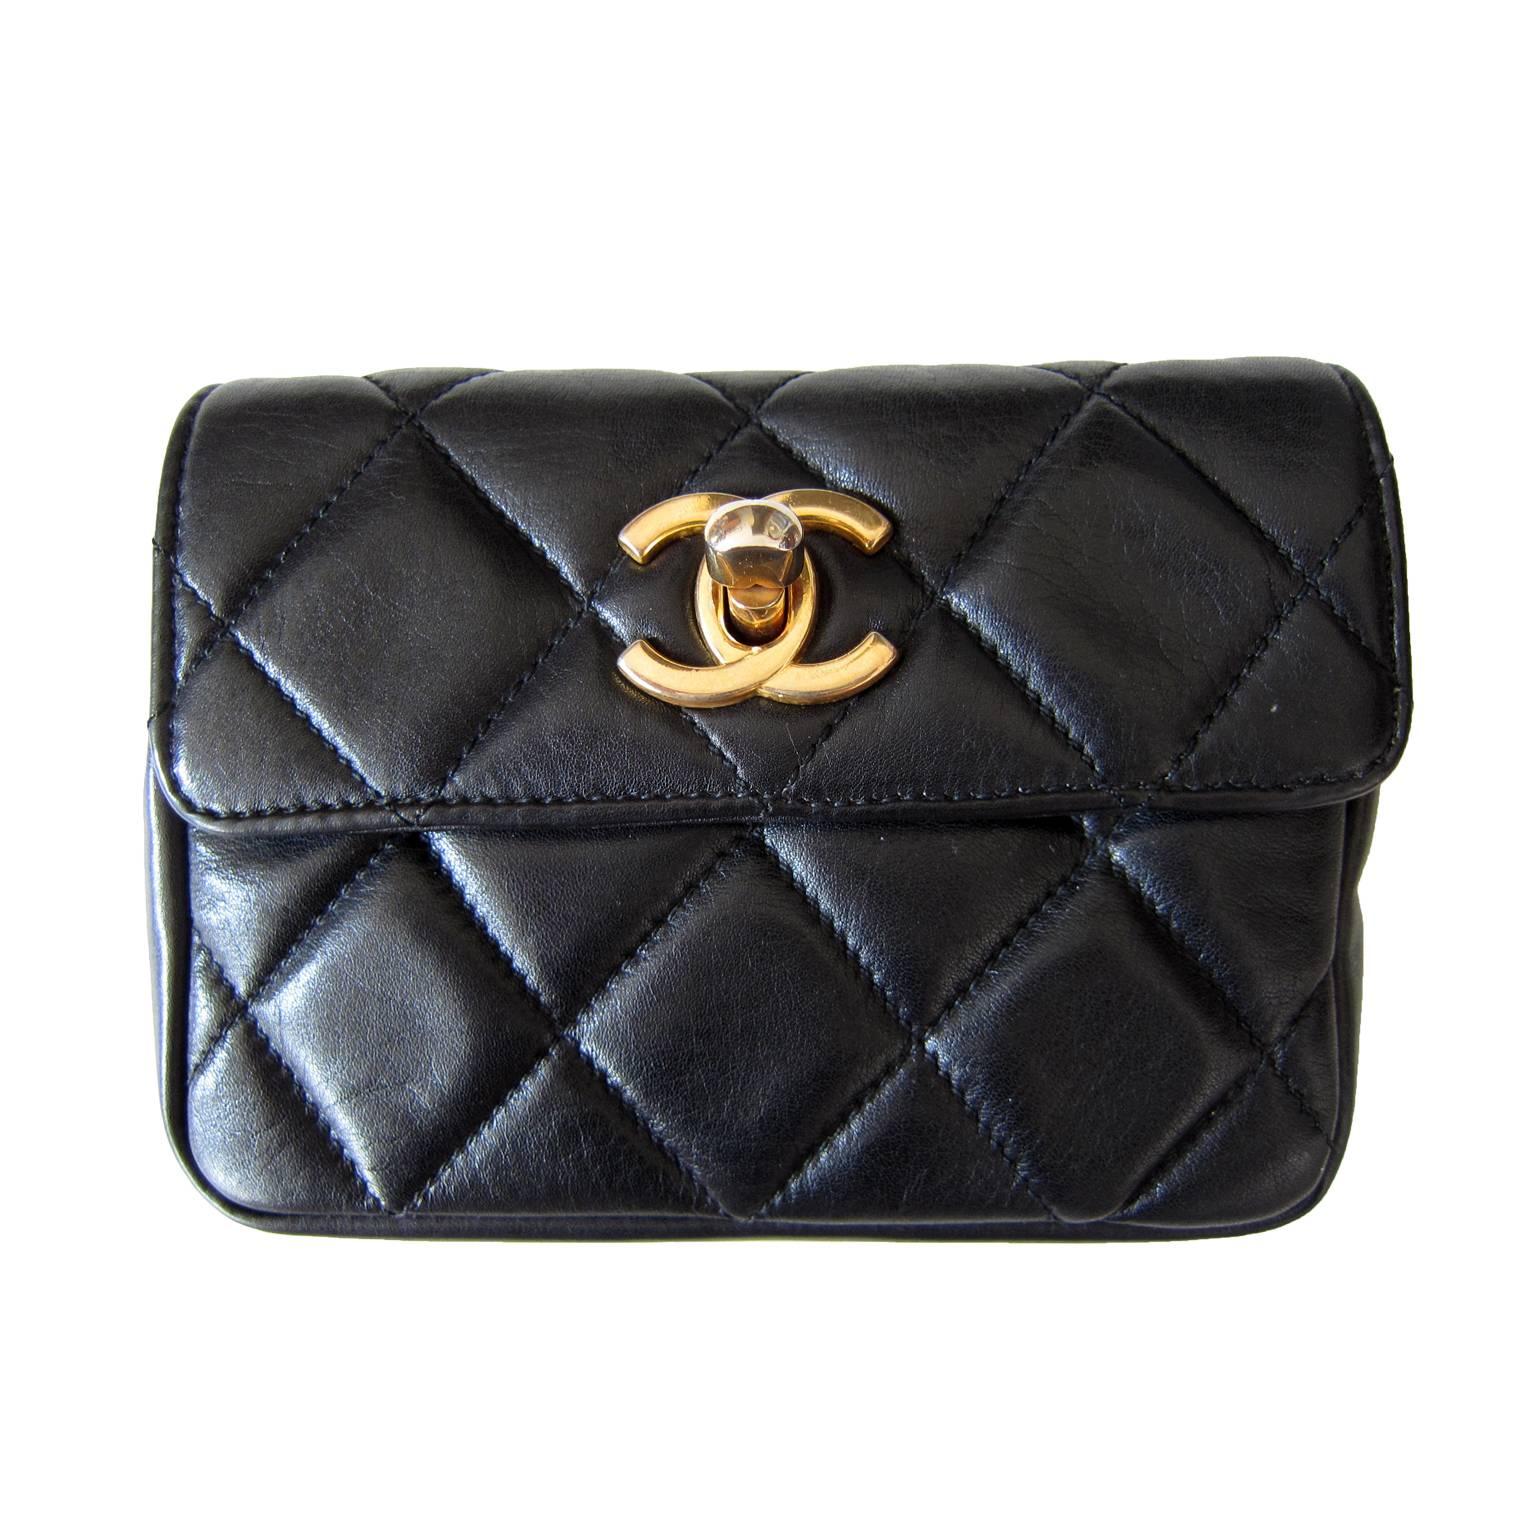 CHANEL CC logos chain belt quilted bag in black leather from circa 90s.
This version of the purse has rare hook closure. 
Made in italy

Measurements : 
Purse : 10 x 13.5 cm
Adjustable belt total length : 98 cm 